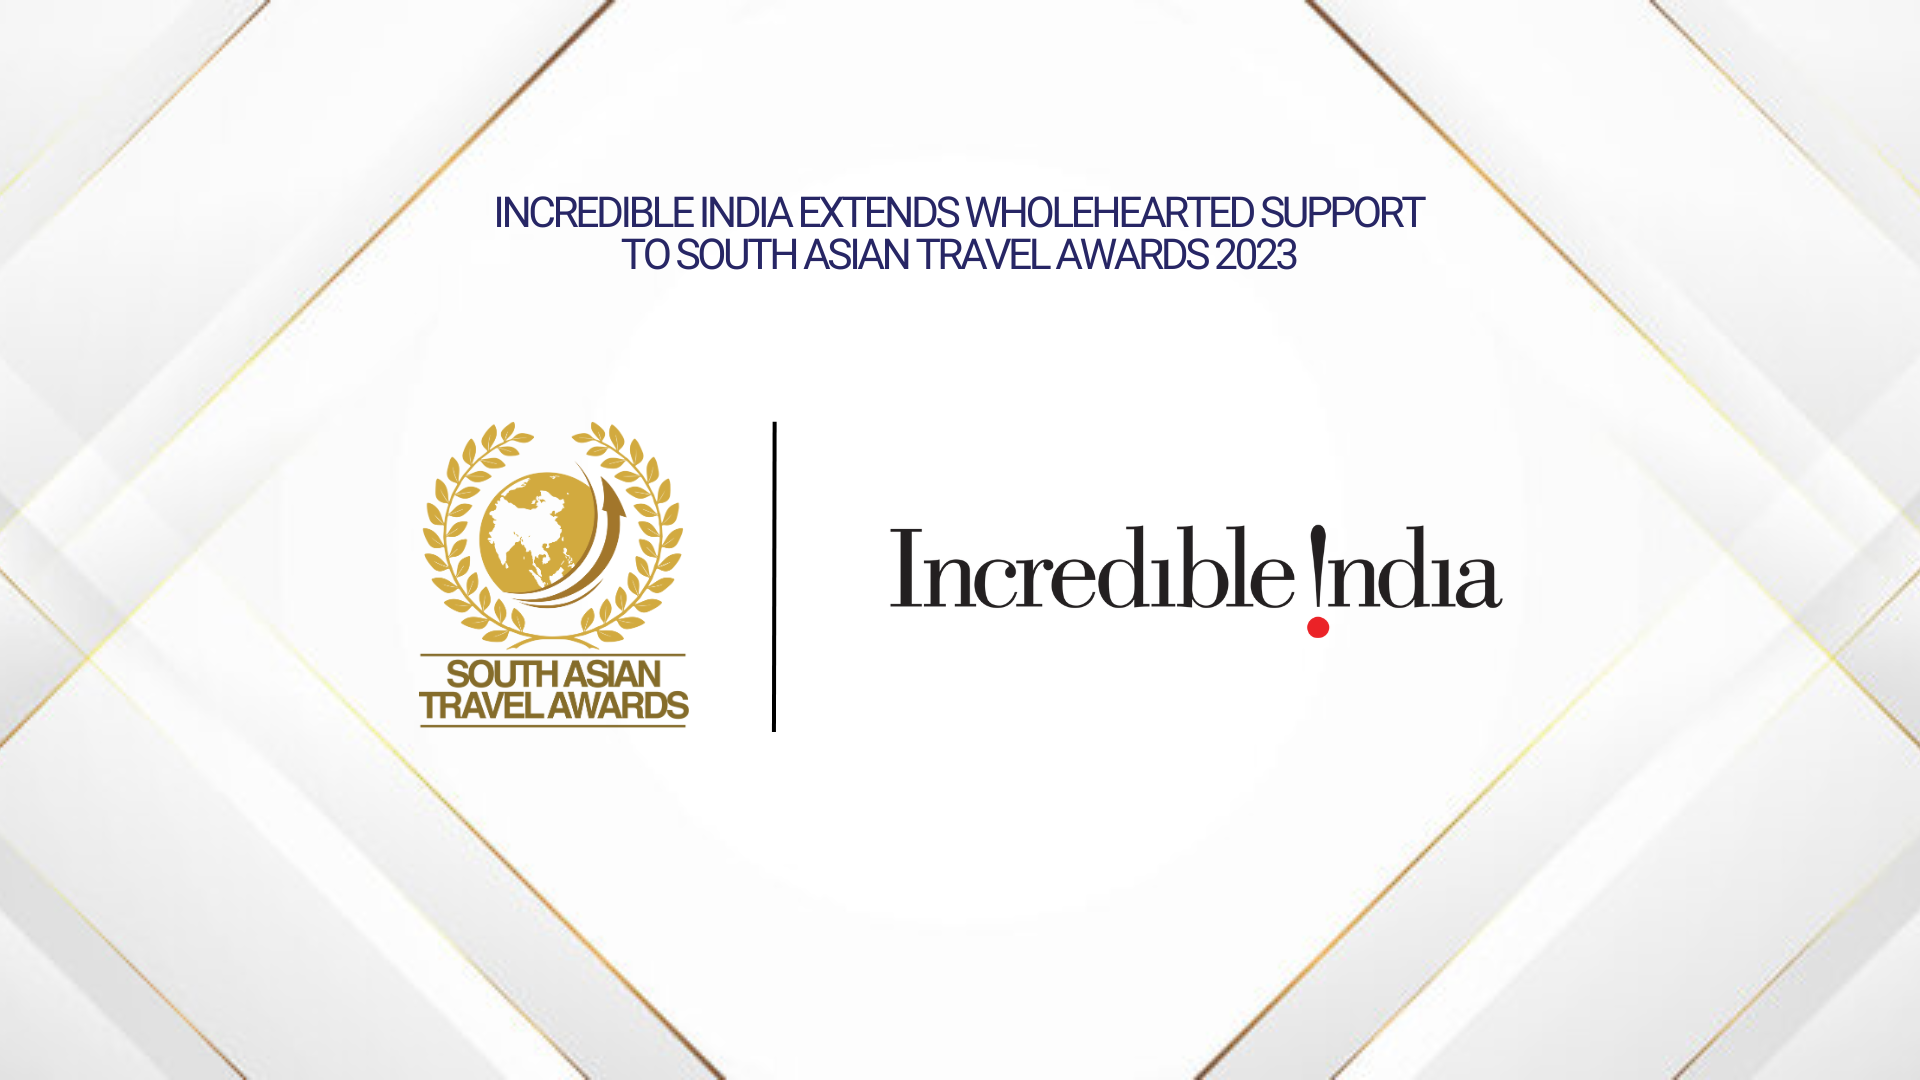 INCREDIBLE INDIA EXTENDS WHOLEHEARTED SUPPORT TO SOUTH ASIAN TRAVEL AWARDS 2023